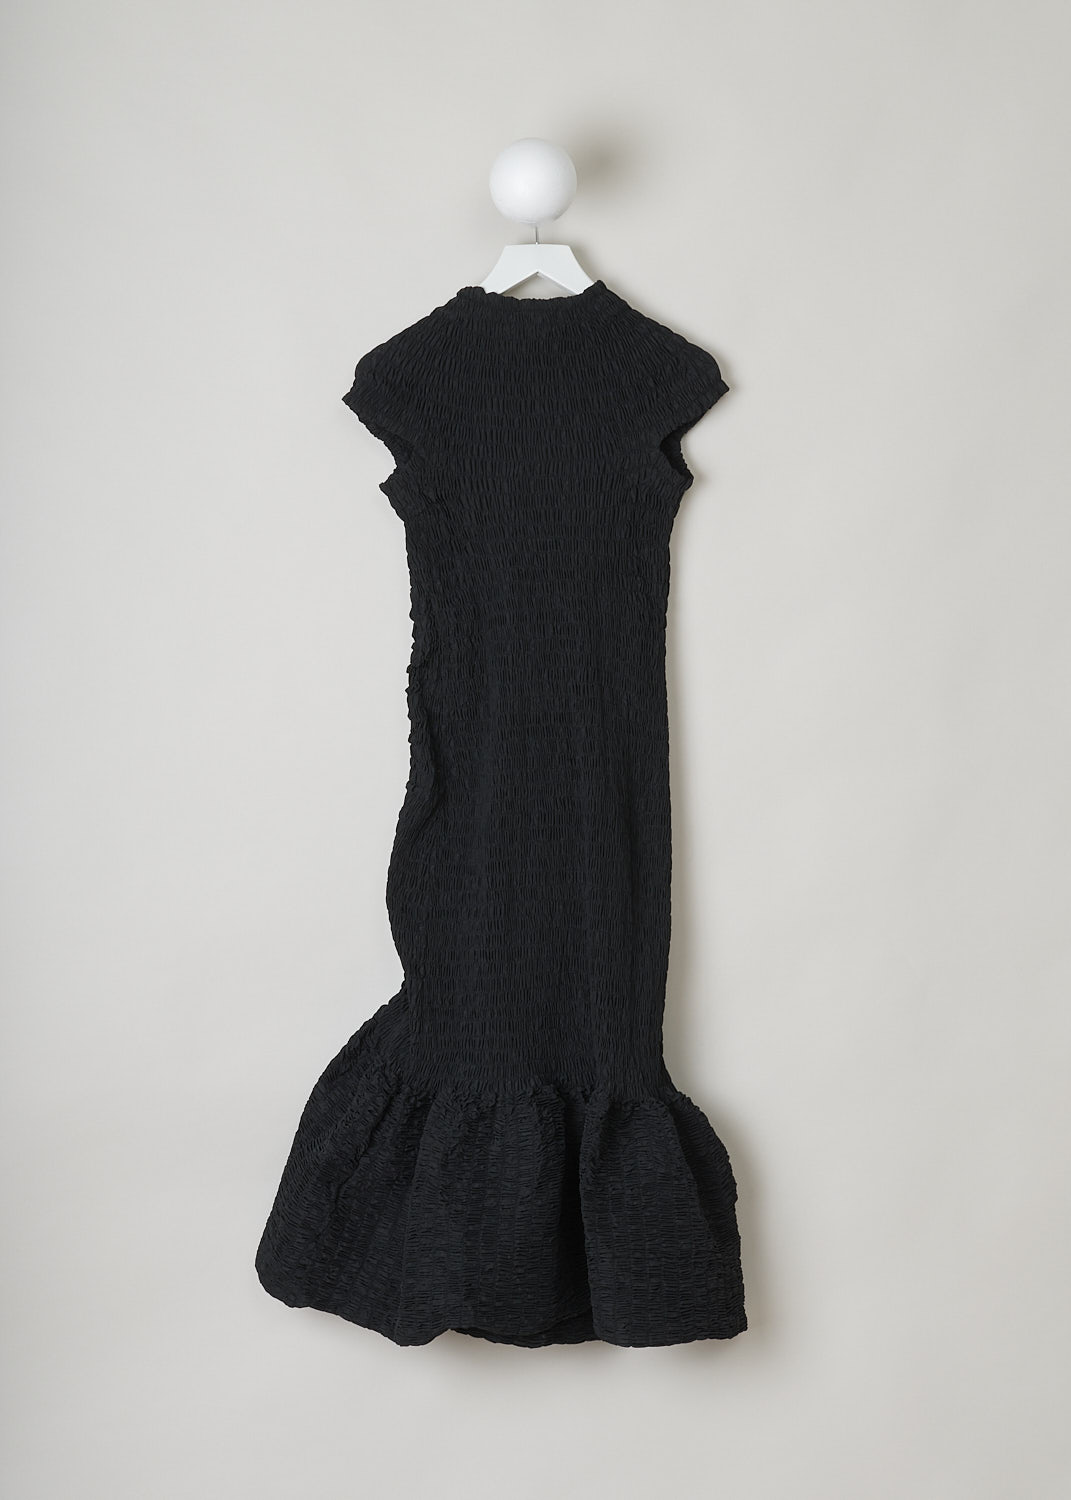 DRIES VAN NOTEN, BLACK SHIRRED MERMAID DRESS, DORY_4351_WW_DRESS_BLA, Black, Back, This black mermaid dress is made out of a black shirred fabric. The dress has a high neckline and cap sleeves. To one side, the dress has a panel that is shirred in a different direction. The dress has a fit-and-flare silhouette with a midi length. This slip-on dress is fully elasticated. 
